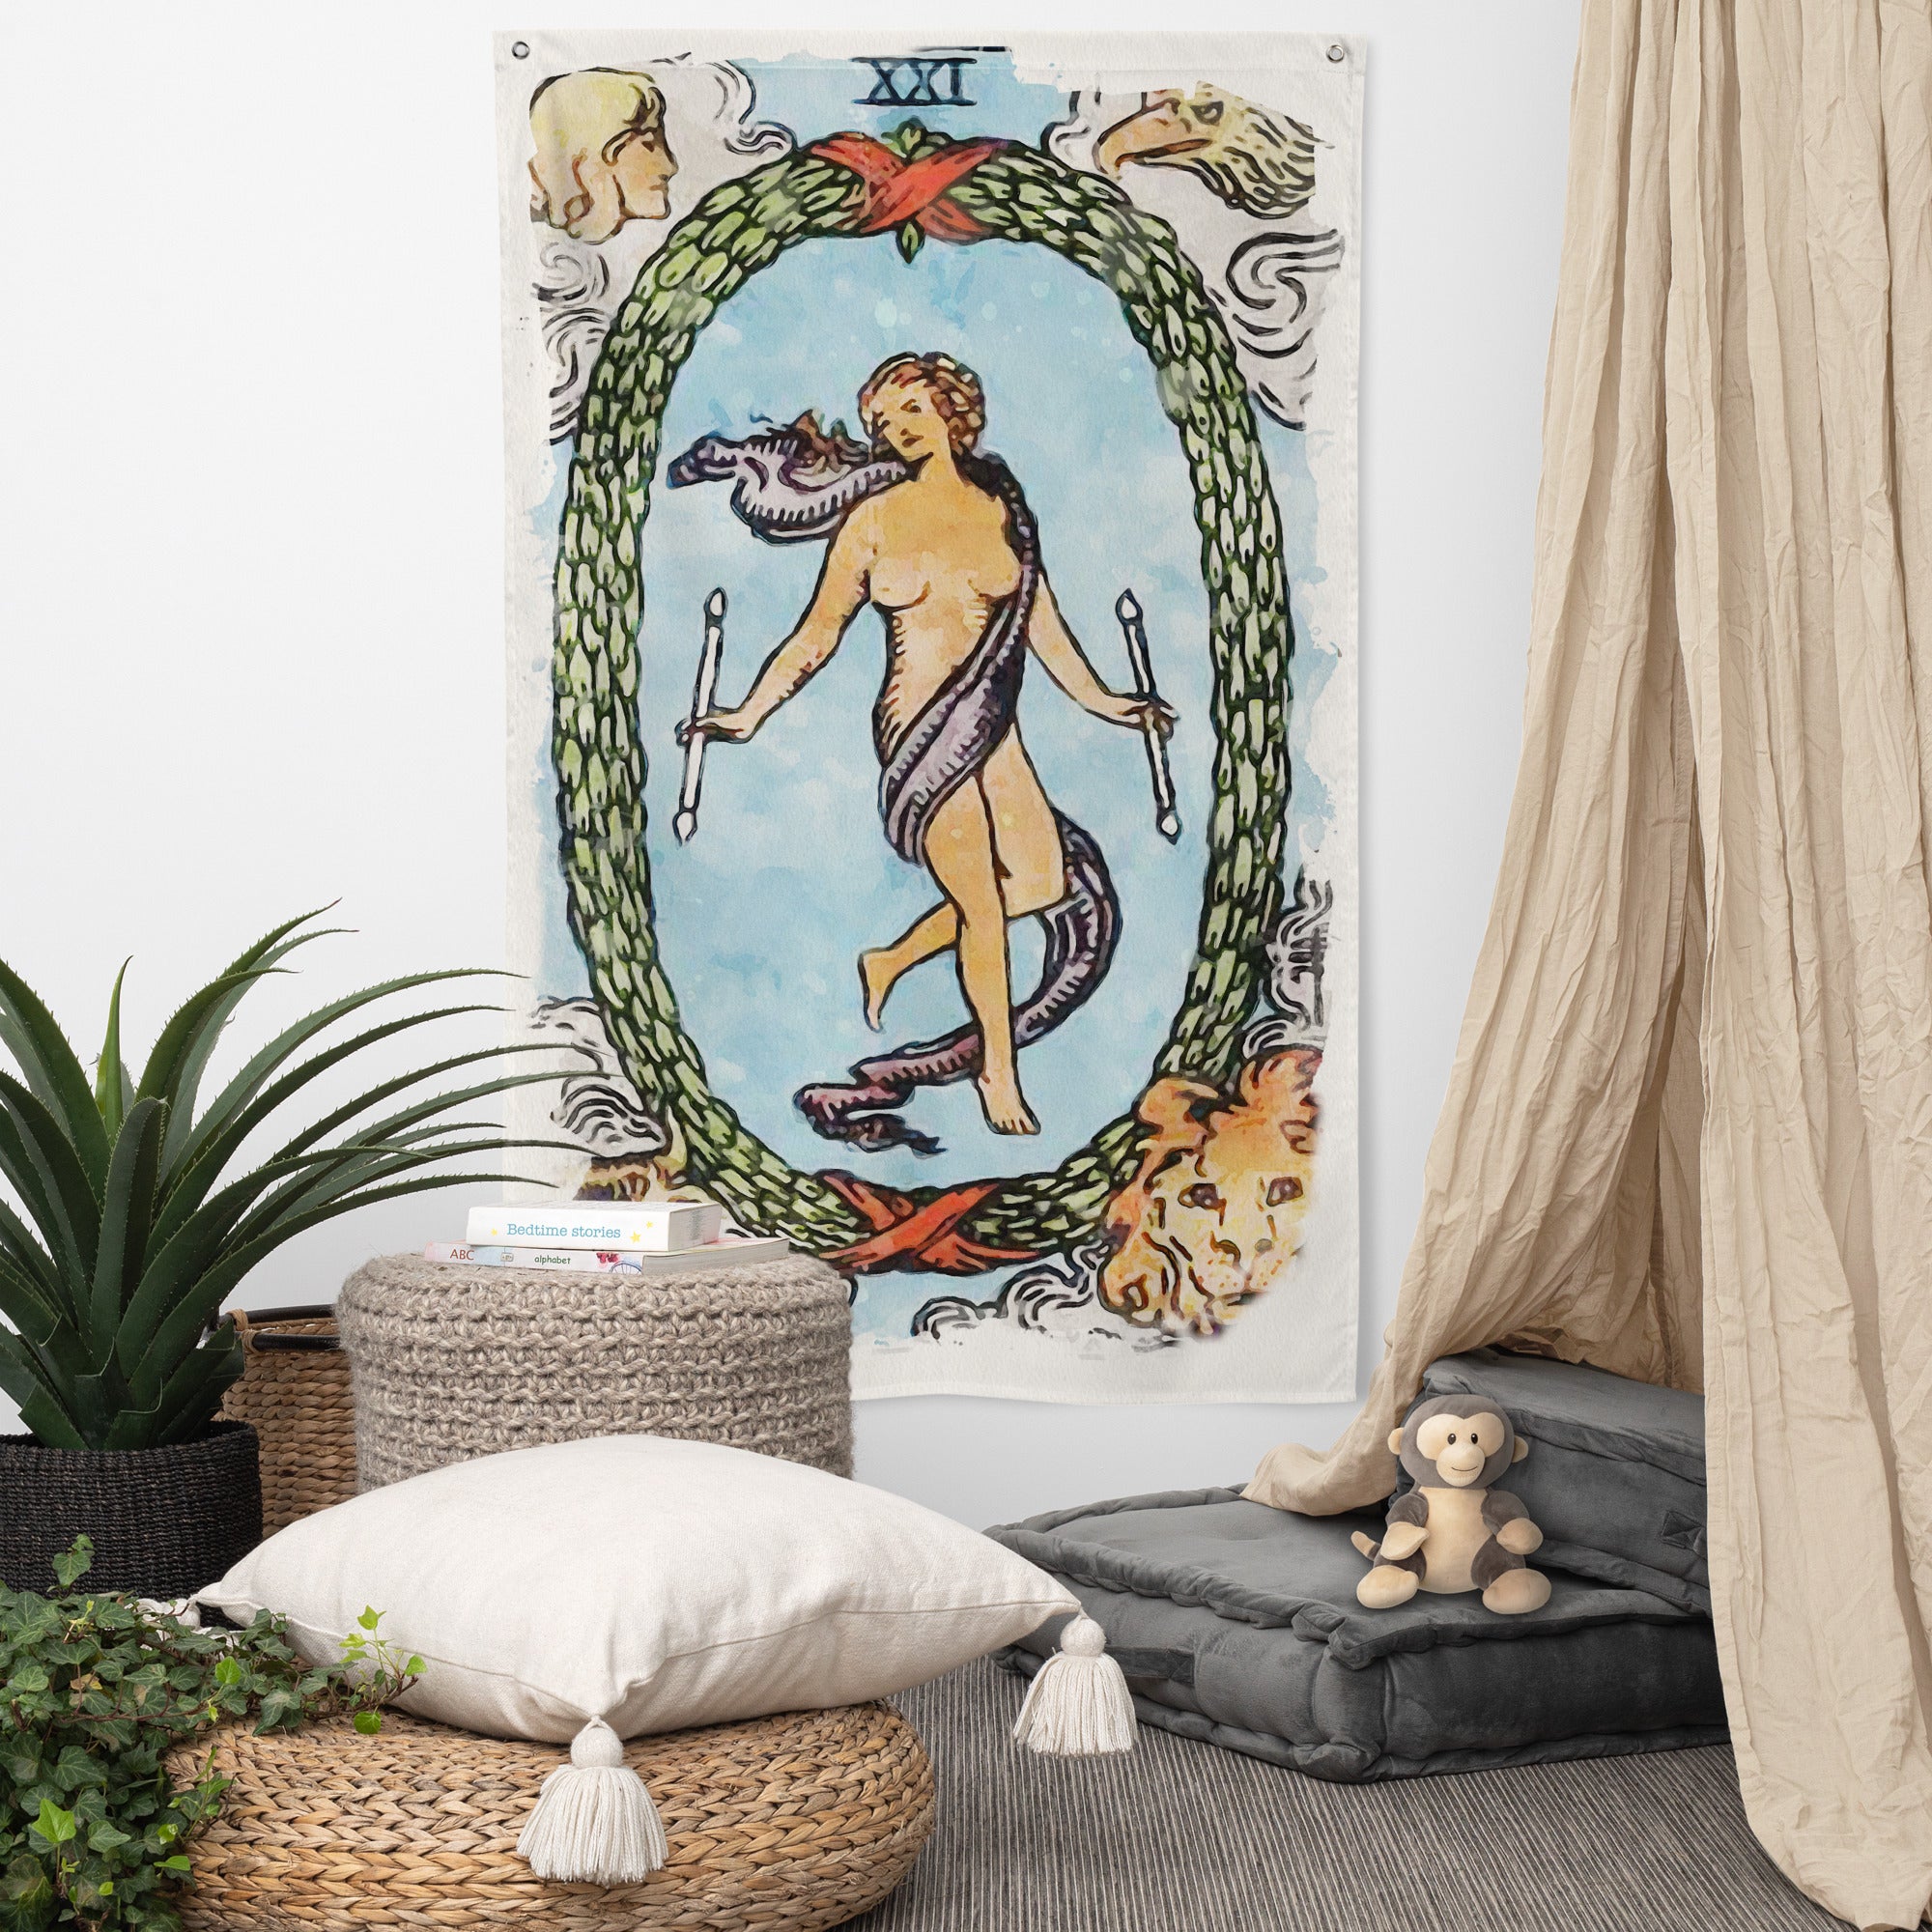 Decorative Wall Flag Of The World Tarot Card | Witchy Tapestry For Esoteric Home Decor | Apollo Tarot